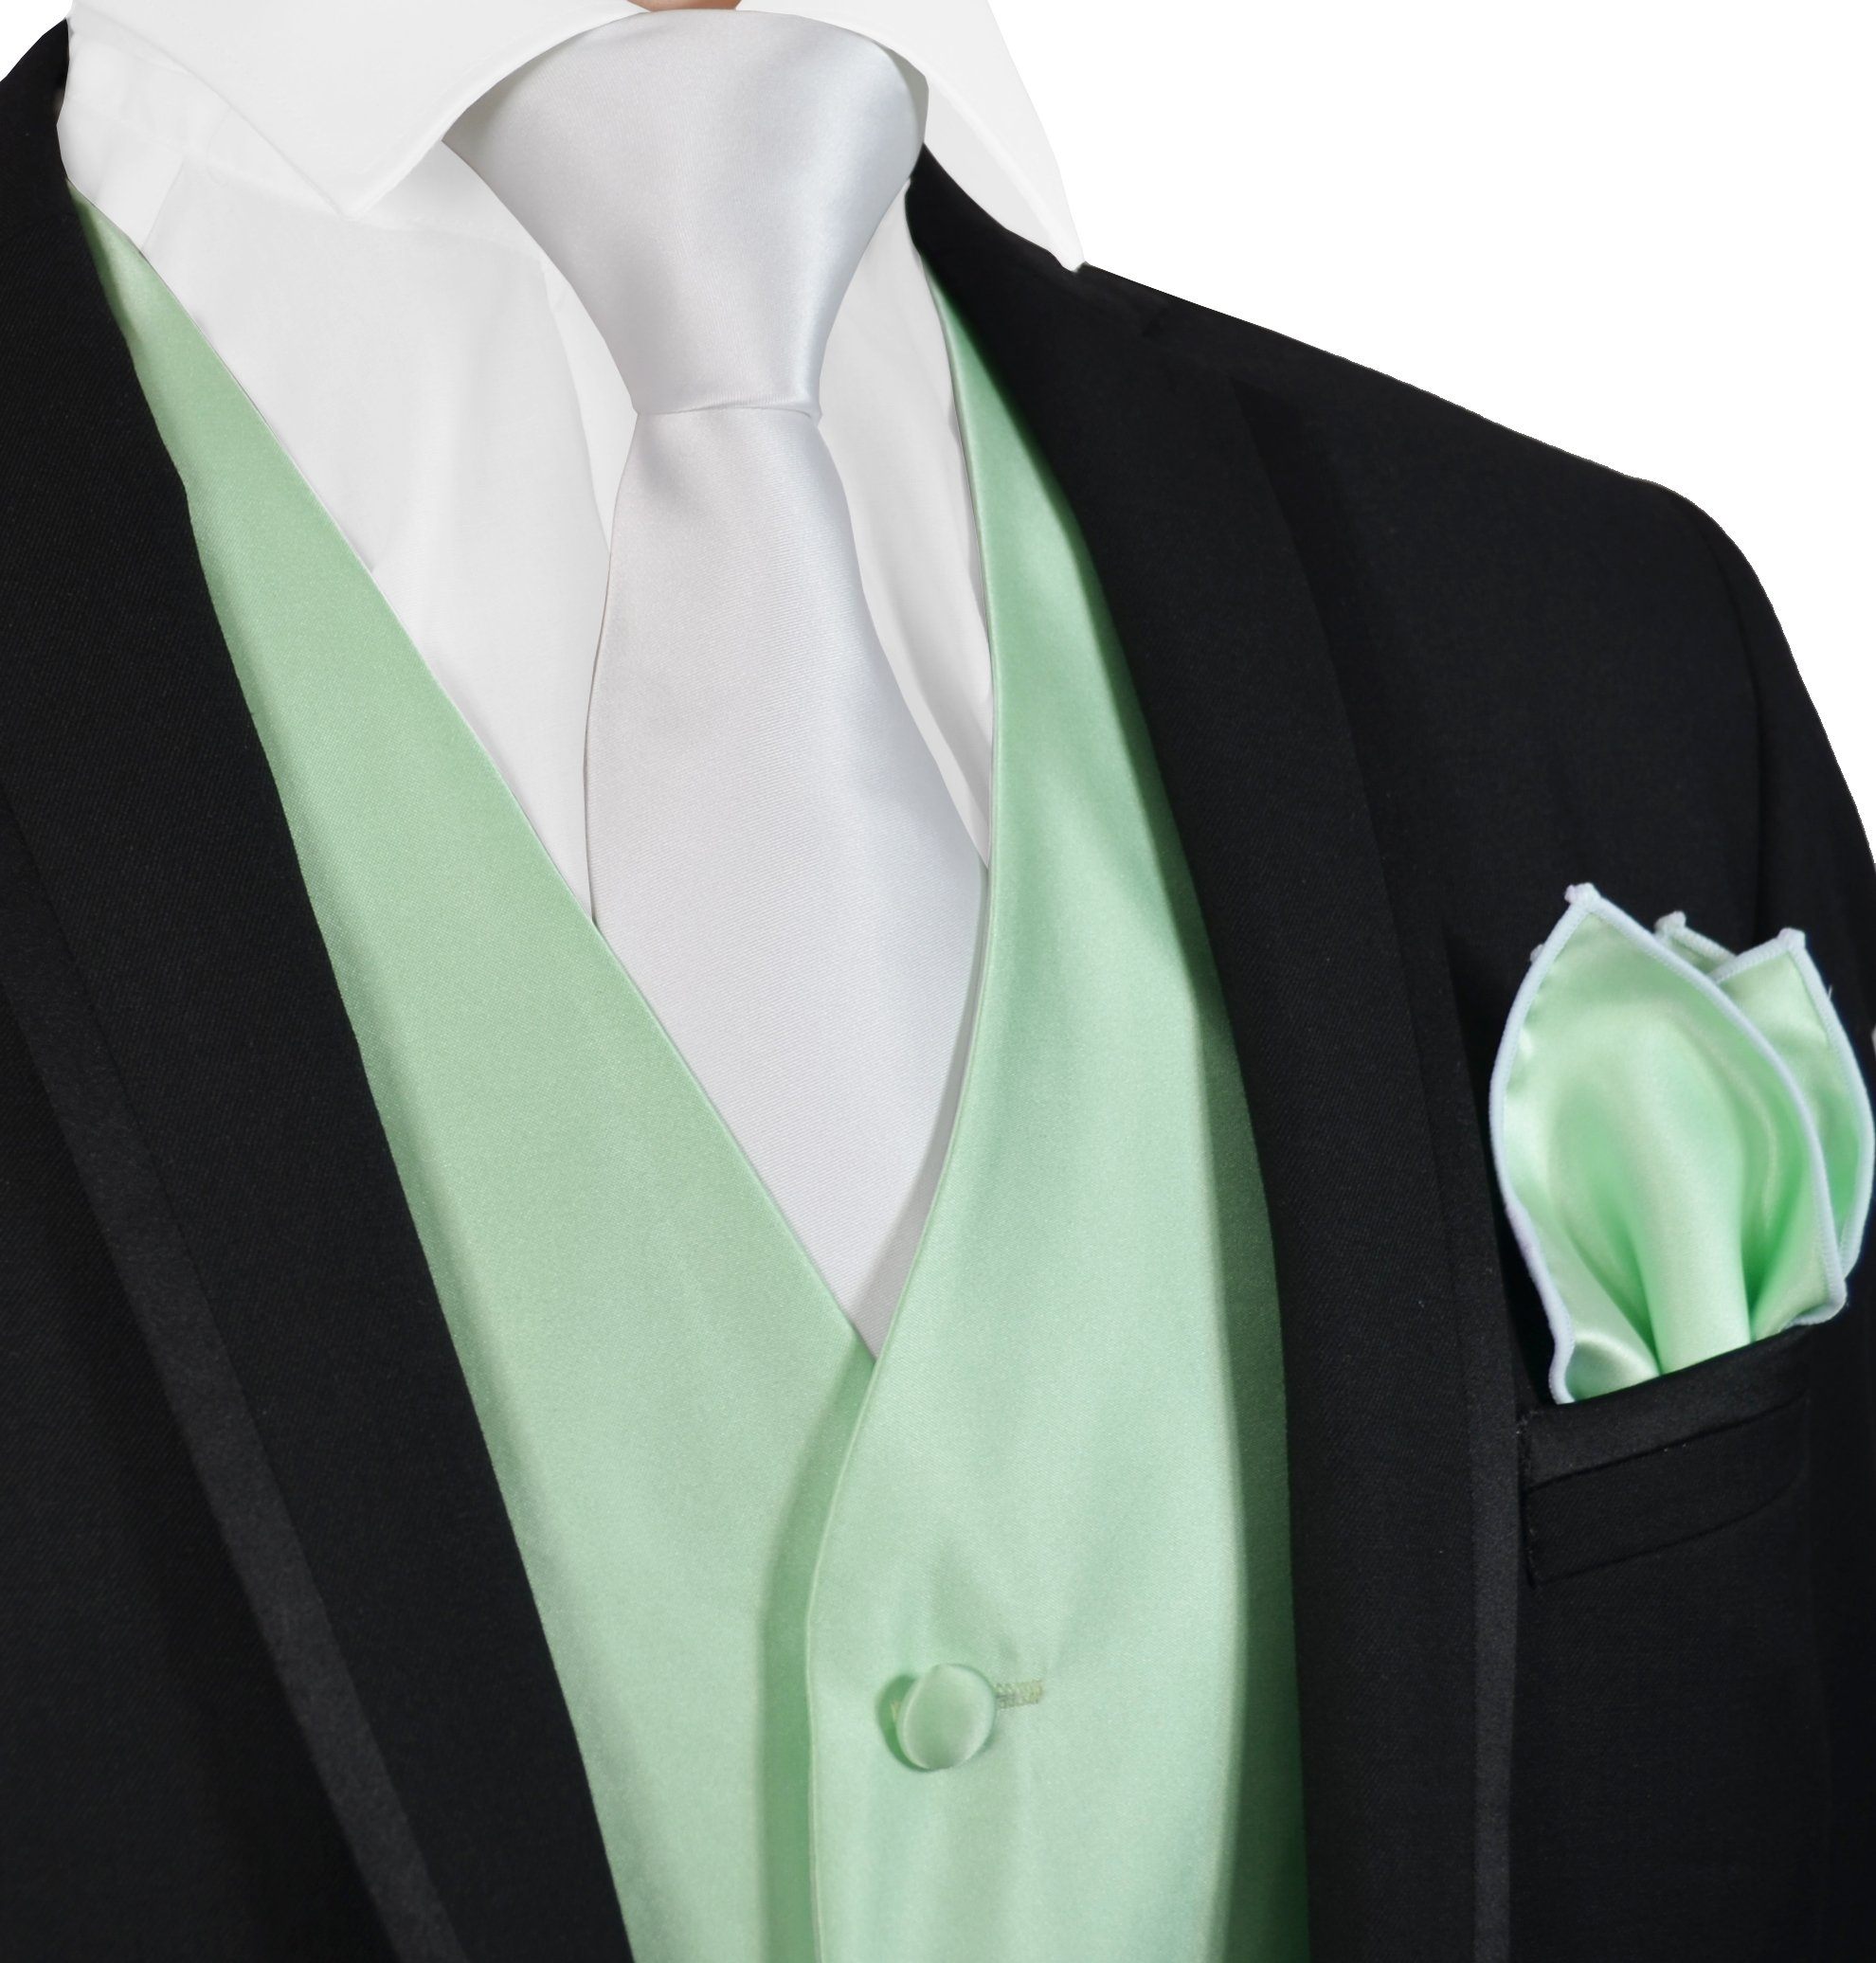 Solid Mint Green Mens Tuxedo Vest, Tie and Trim Pocket Square